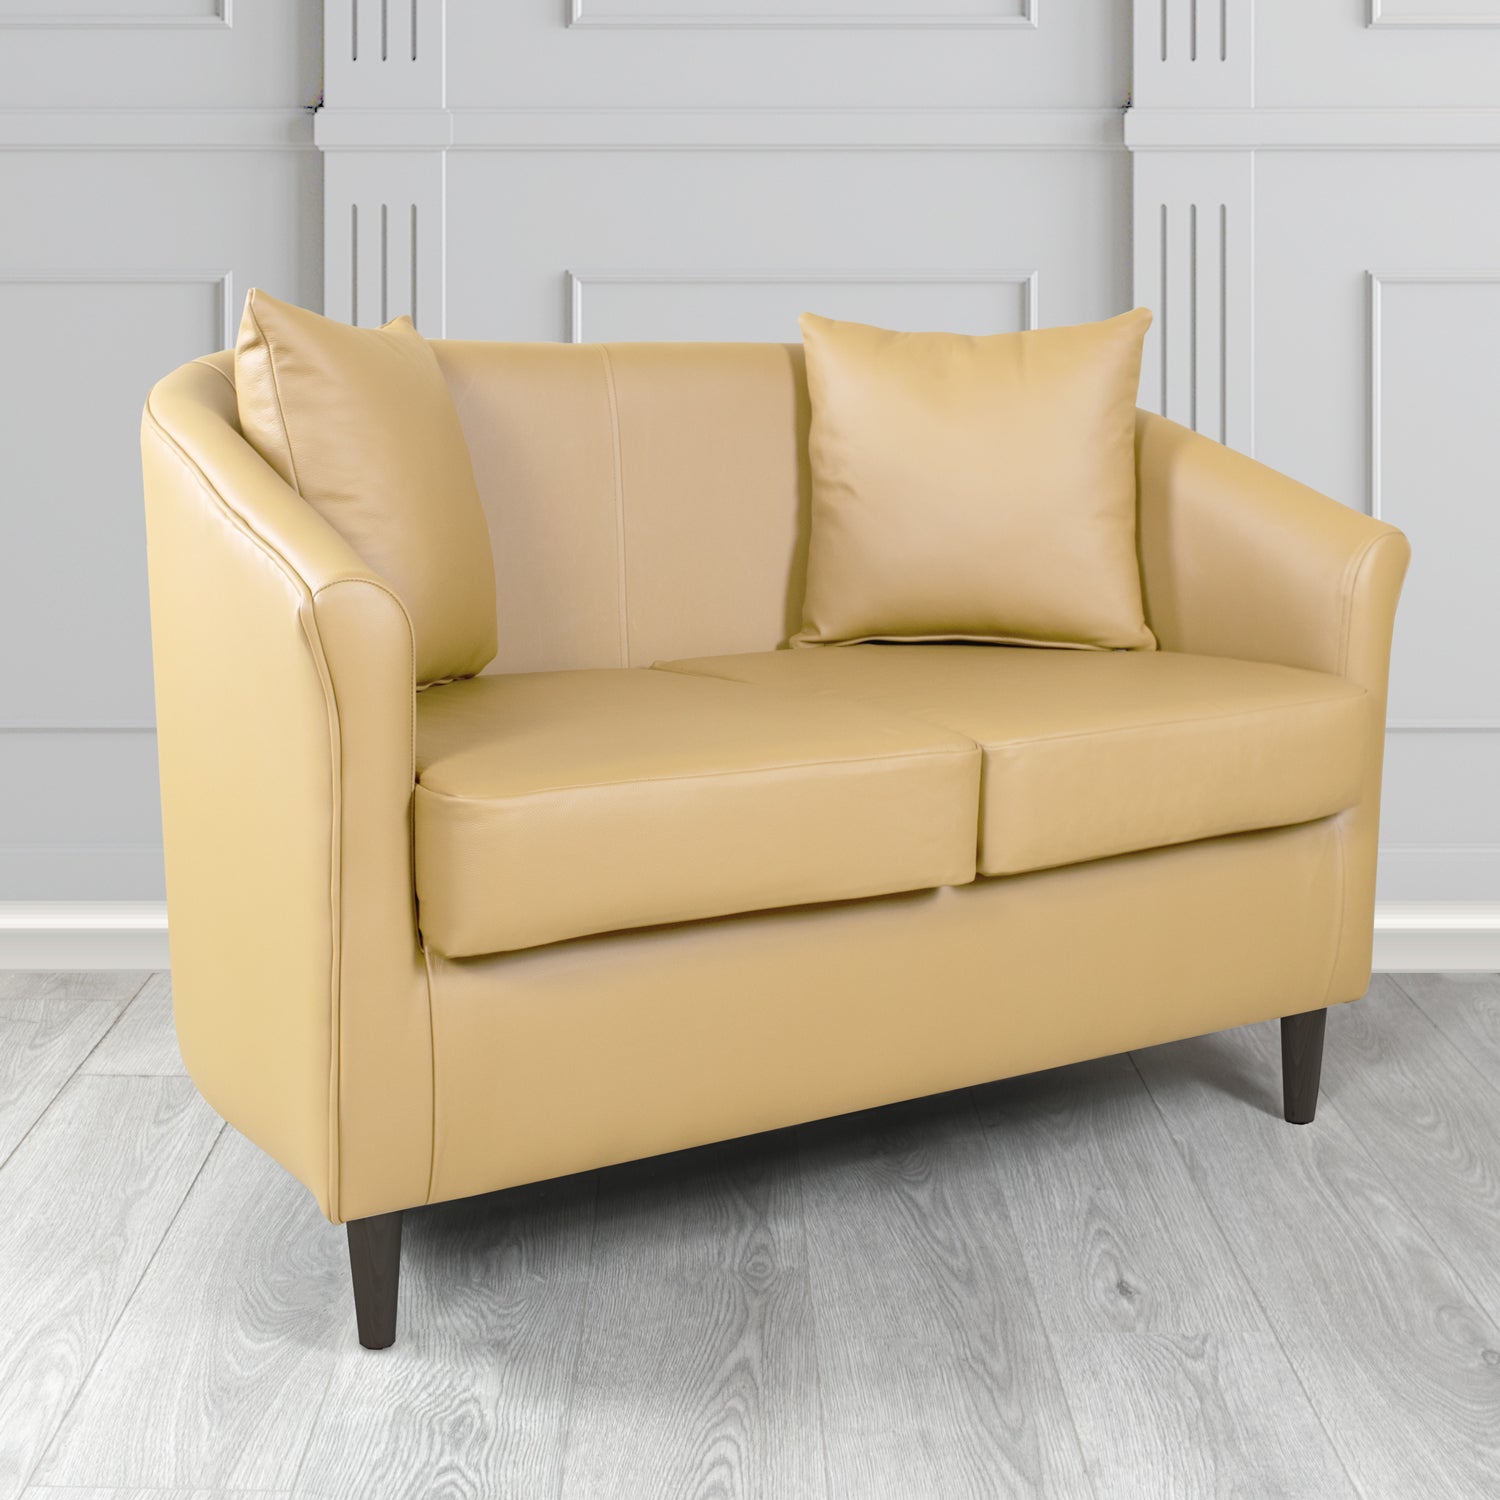 St Tropez Shelly Stone Crib 5 Genuine Leather 2 Seater Tub Sofa with Scatter Cushions - The Tub Chair Shop